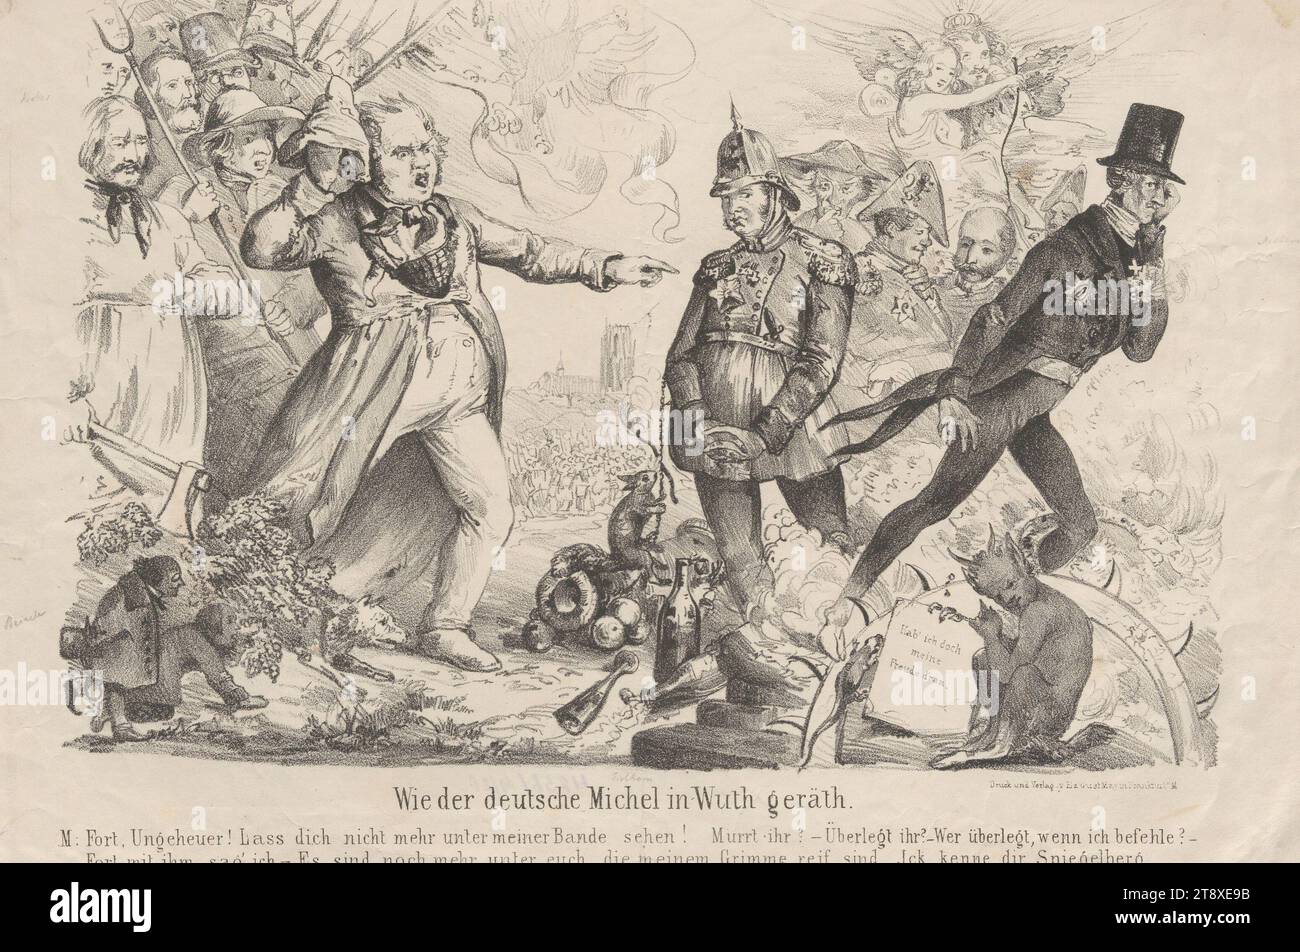 How the German Michel geräth in Wuth.' (Caricature on the Revolution of 1848, among the sitters Metternich, Friedrich Hecker, Ludwig I of Bavaria and Lola Montez), Eduard Gustav May (1818-1907), publisher, 1848, paper, chalk-manner lithograph, height 30, 5 cm, width 43, 9 cm, Caricature, Satire, Politics, Revolutions of 1848, 1849, Pre-March, Biedermeier, minister ~ government, The Vienna Collection Stock Photo